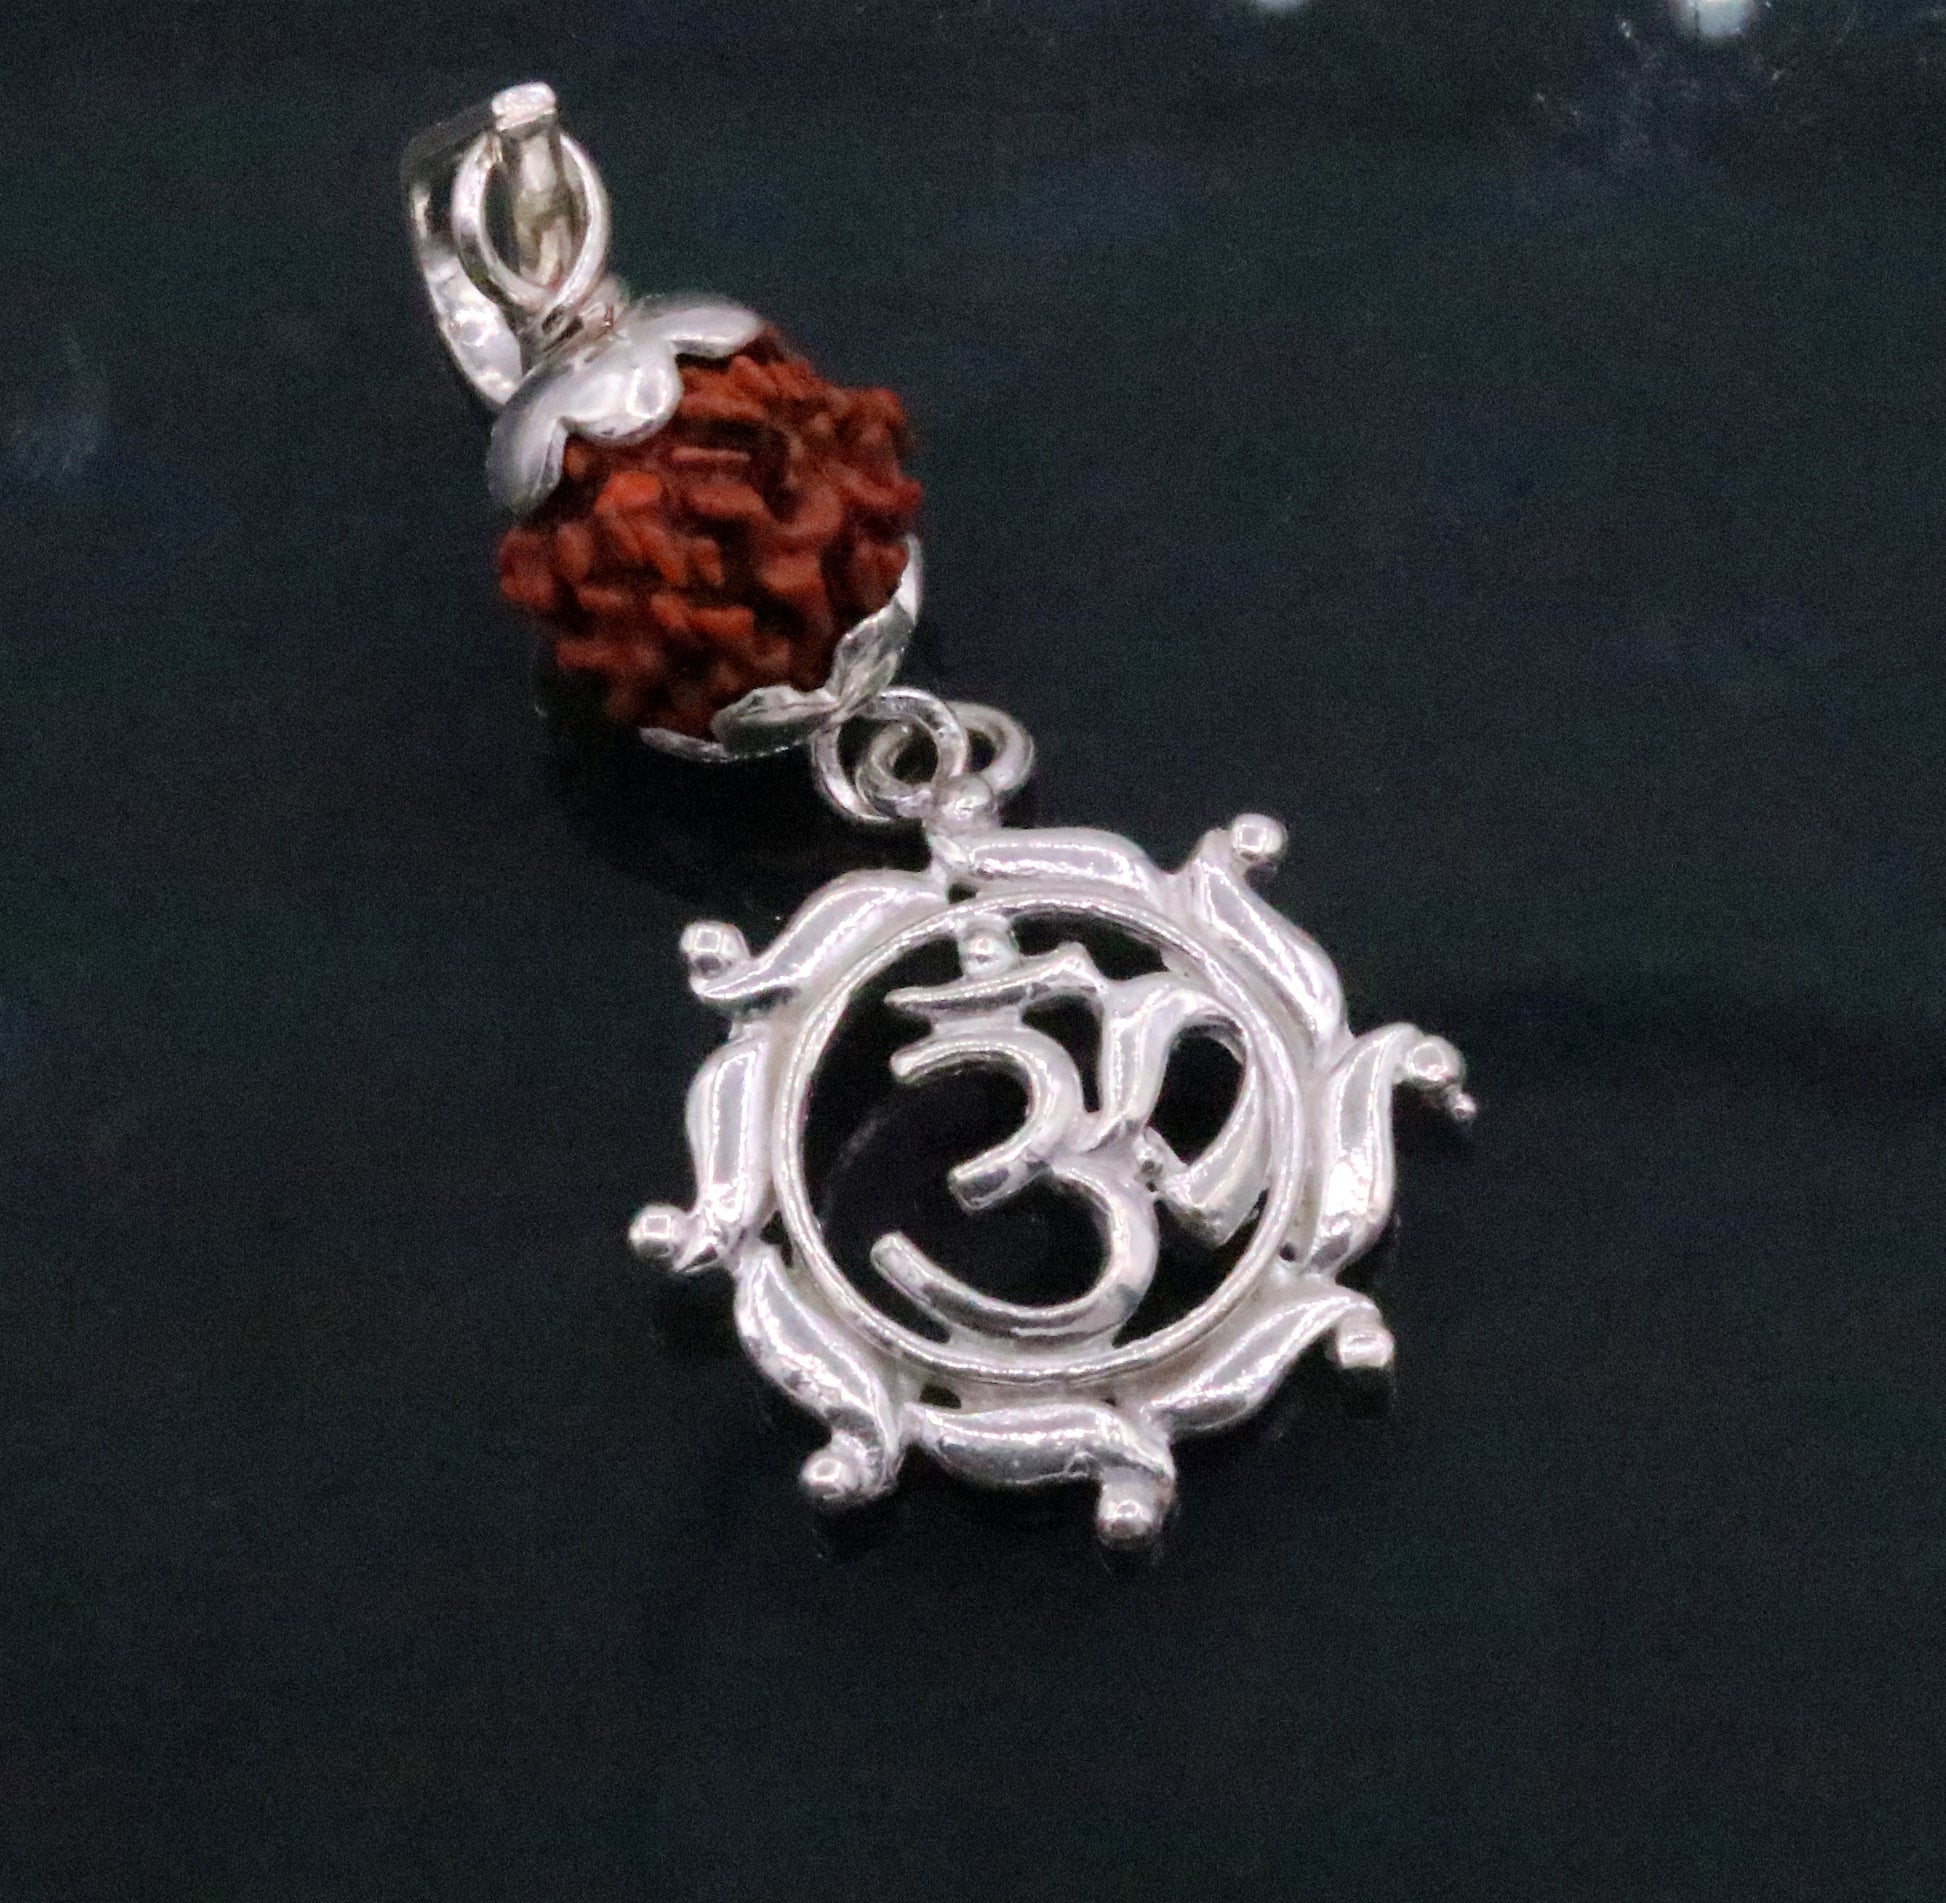 Vintage antique sterling silver handmade fabulous real rudraksha bead with 'aum' pendant unisex jewelry nsp96 - TRIBAL ORNAMENTS